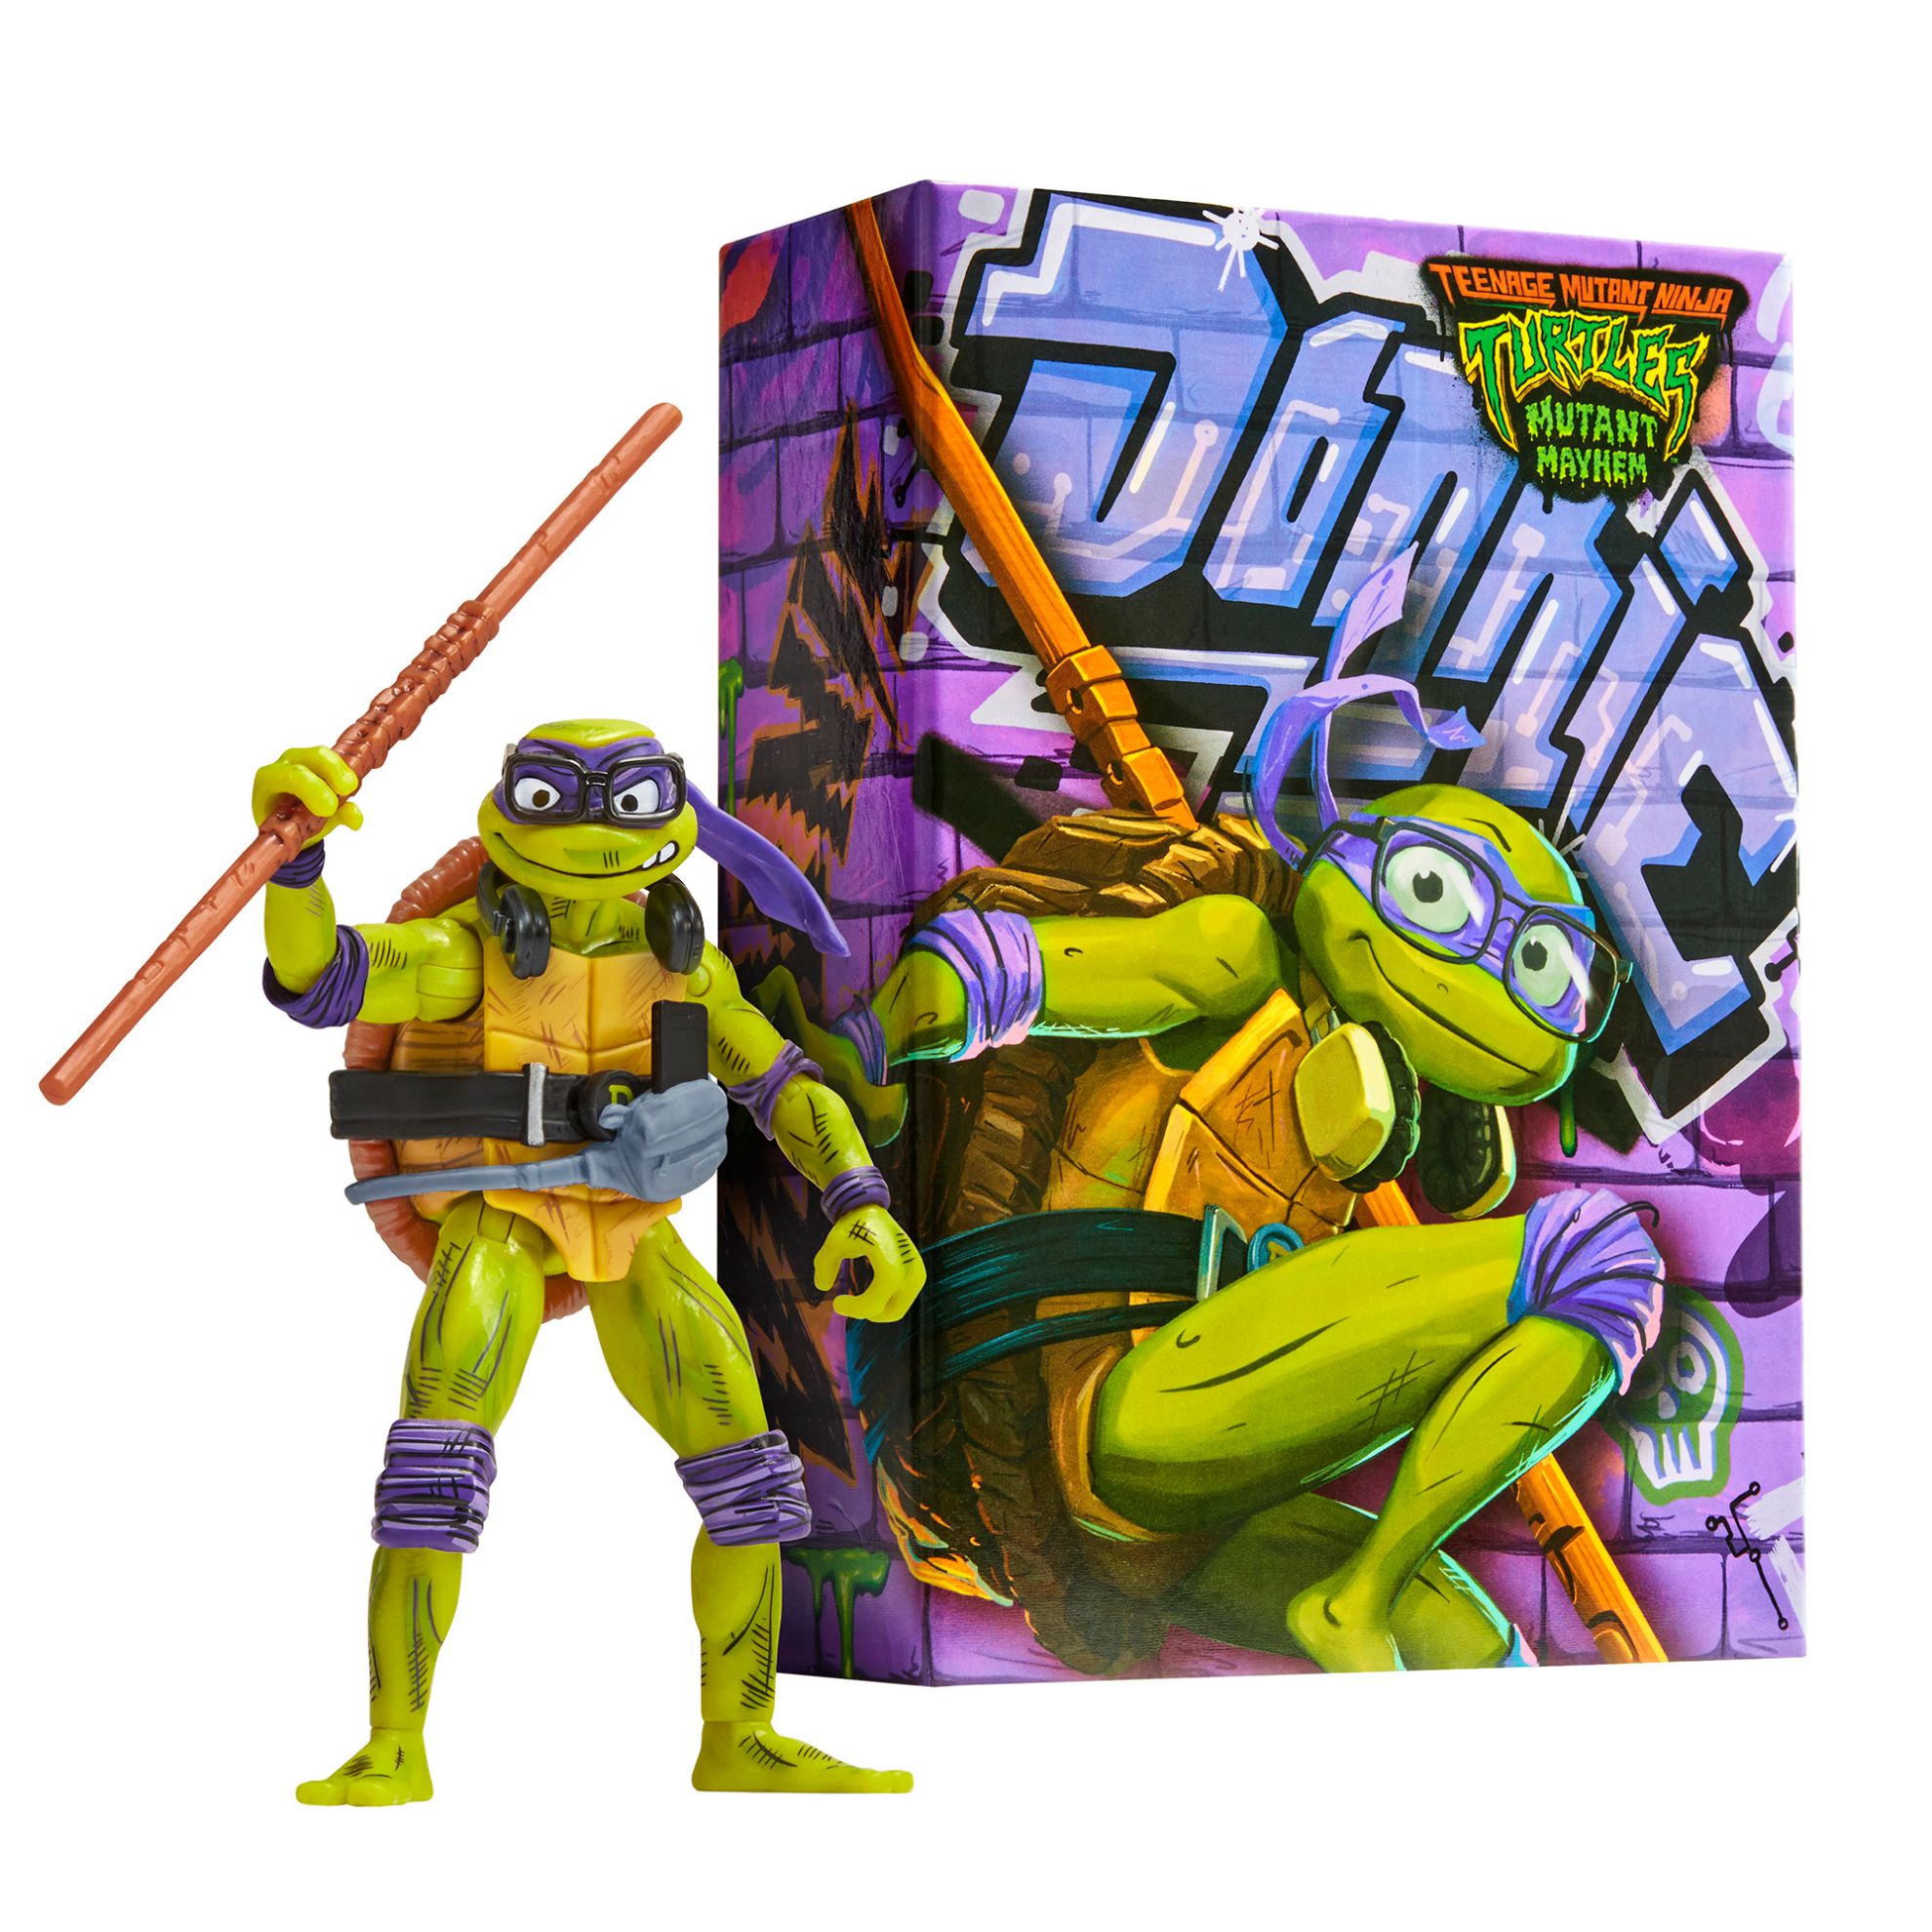 https://www.character-online.com/images/thumbs/0019600_tmnt-special-edition-mutant-mayhem-action-figure-donatello.jpeg